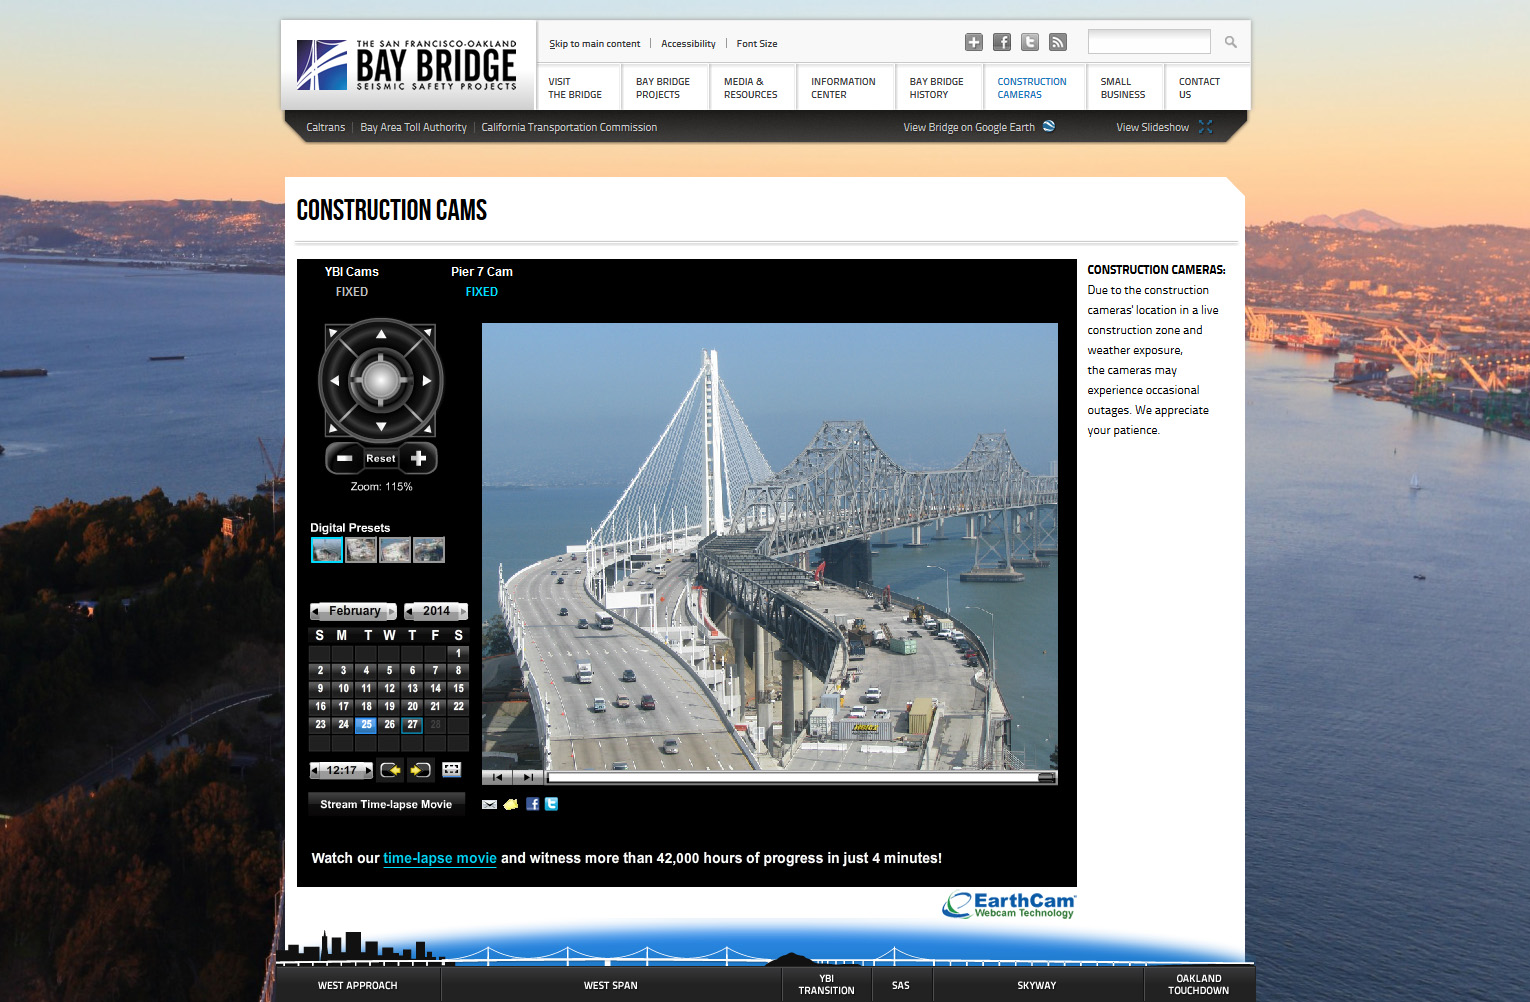 San Francisco-Oakland Bay Bridge construction was documented by webcams for over 5 years